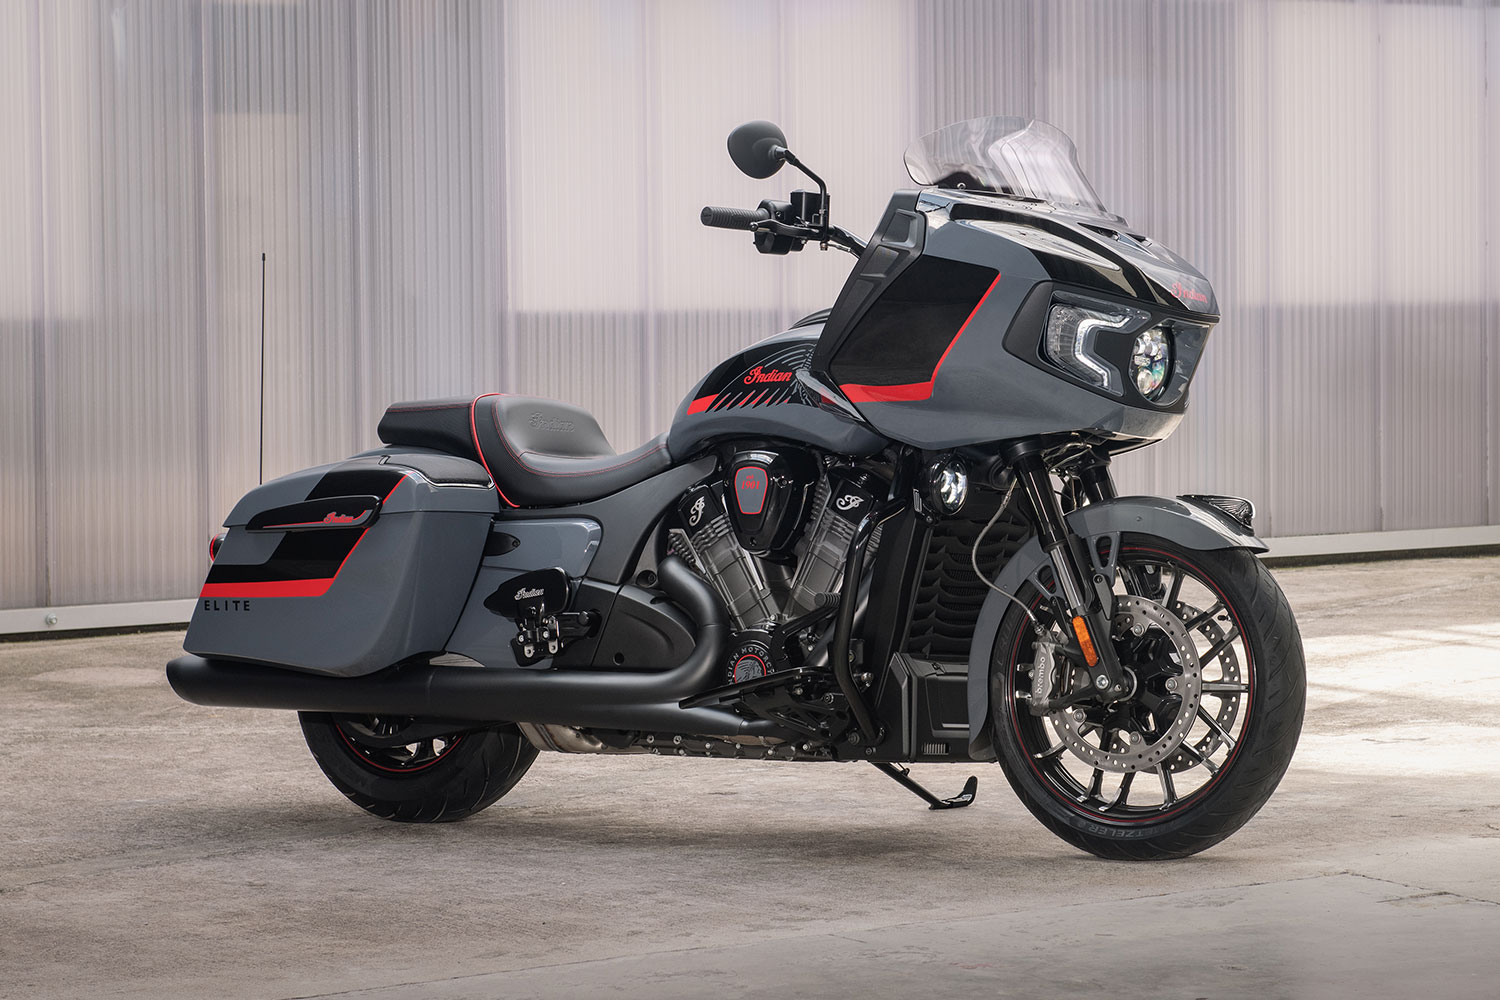 Indian's challenger elite. Photo courtesy of Indian Motorcycles.